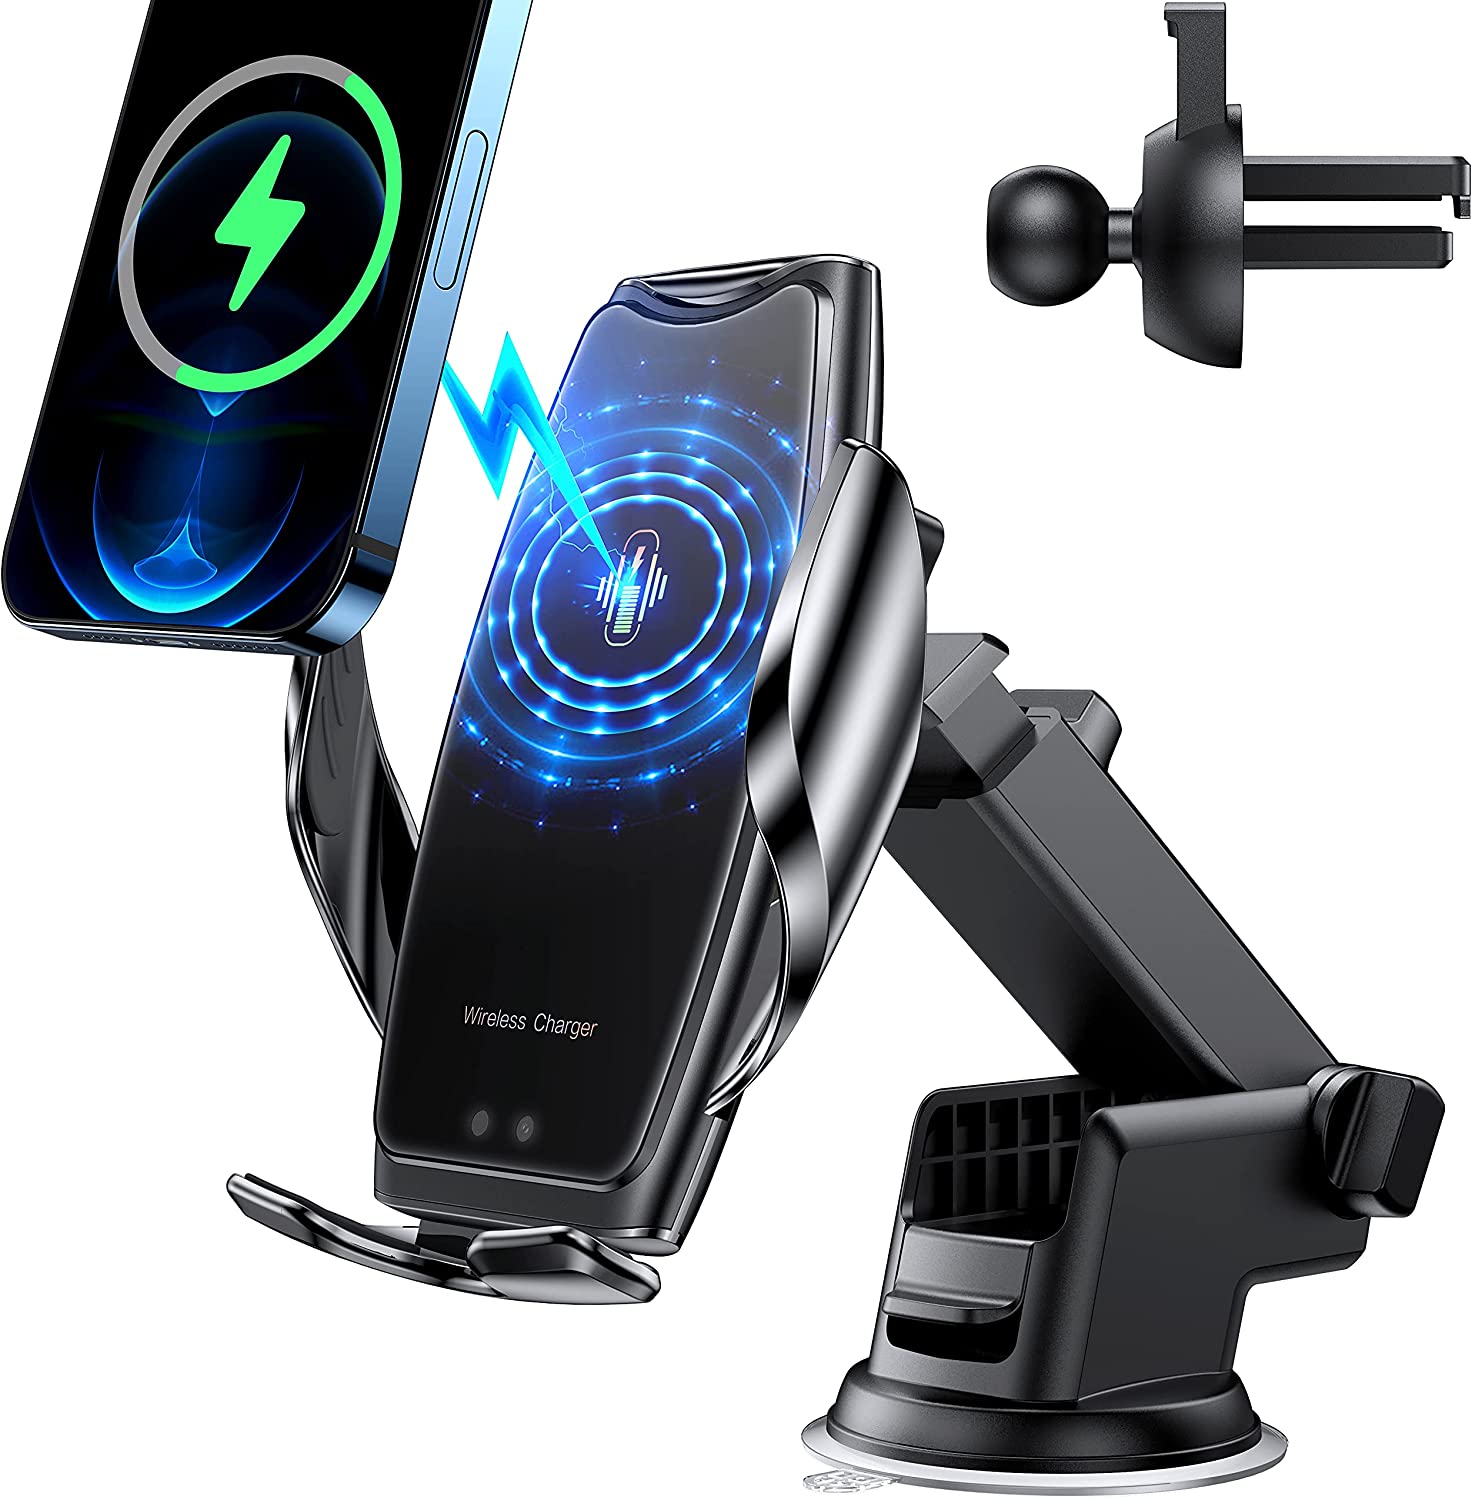 Wireless Car Charger Promo Code